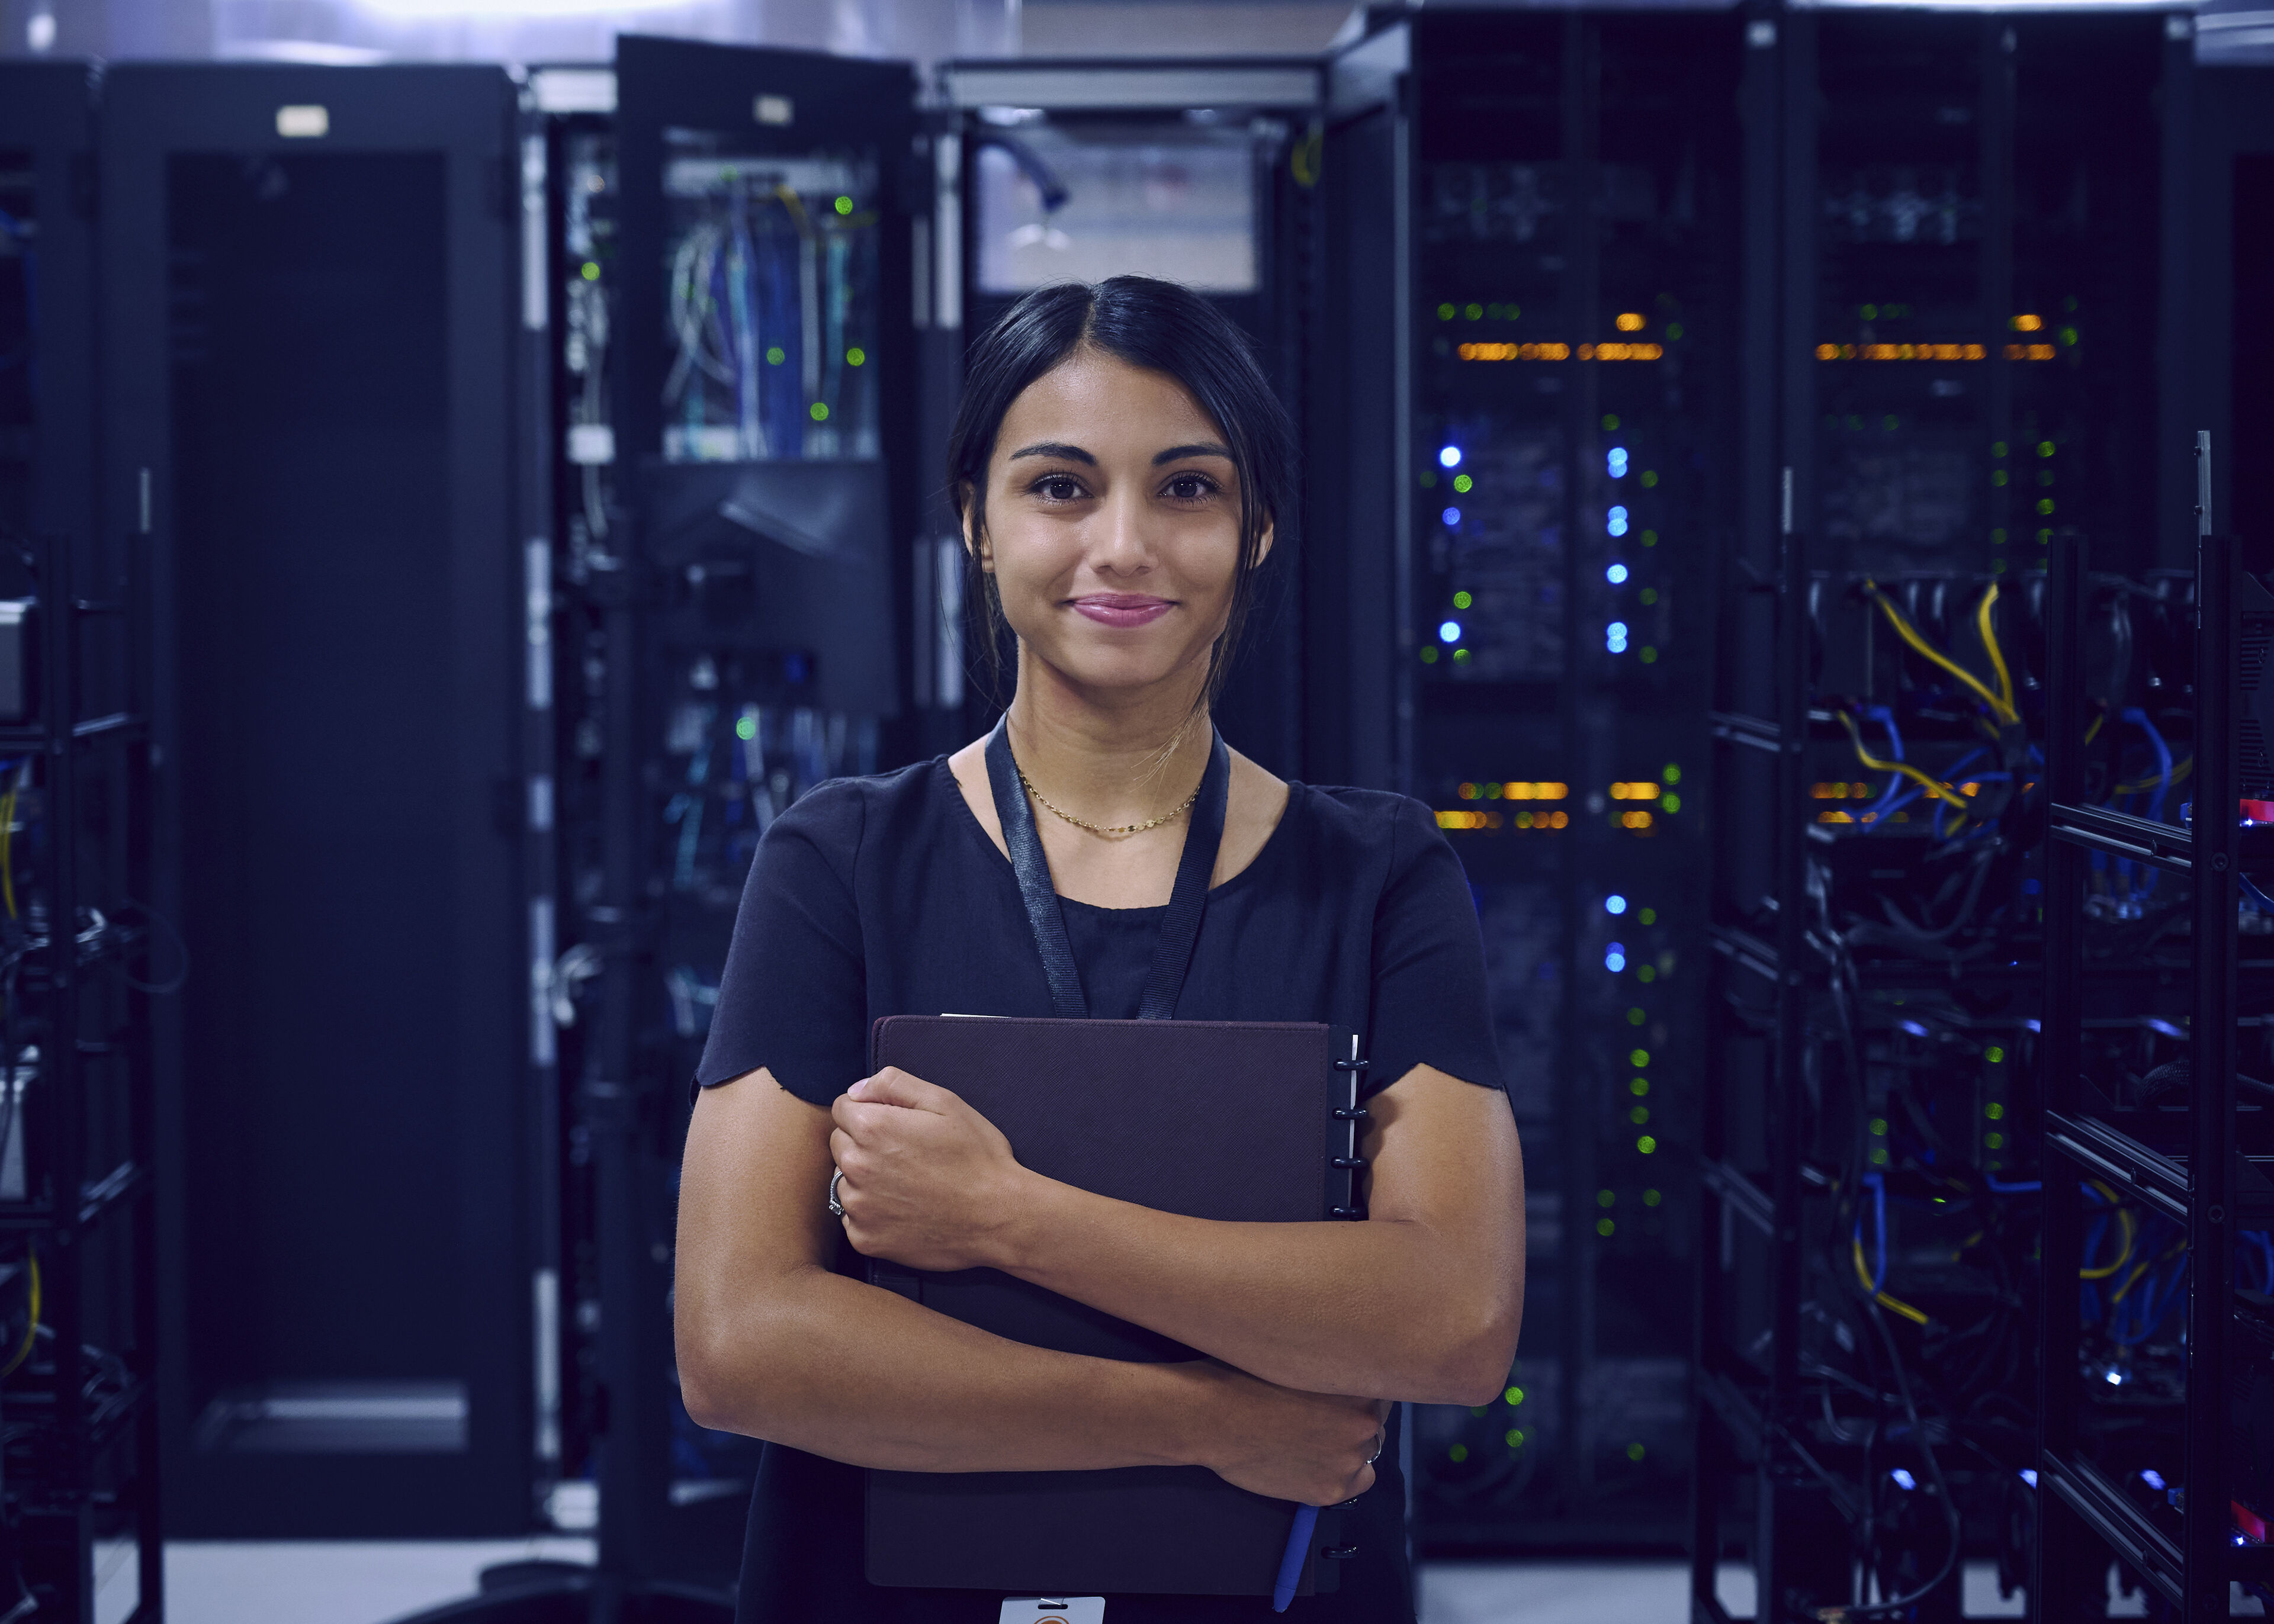 Confident woman with a clipboard standing in a data center.